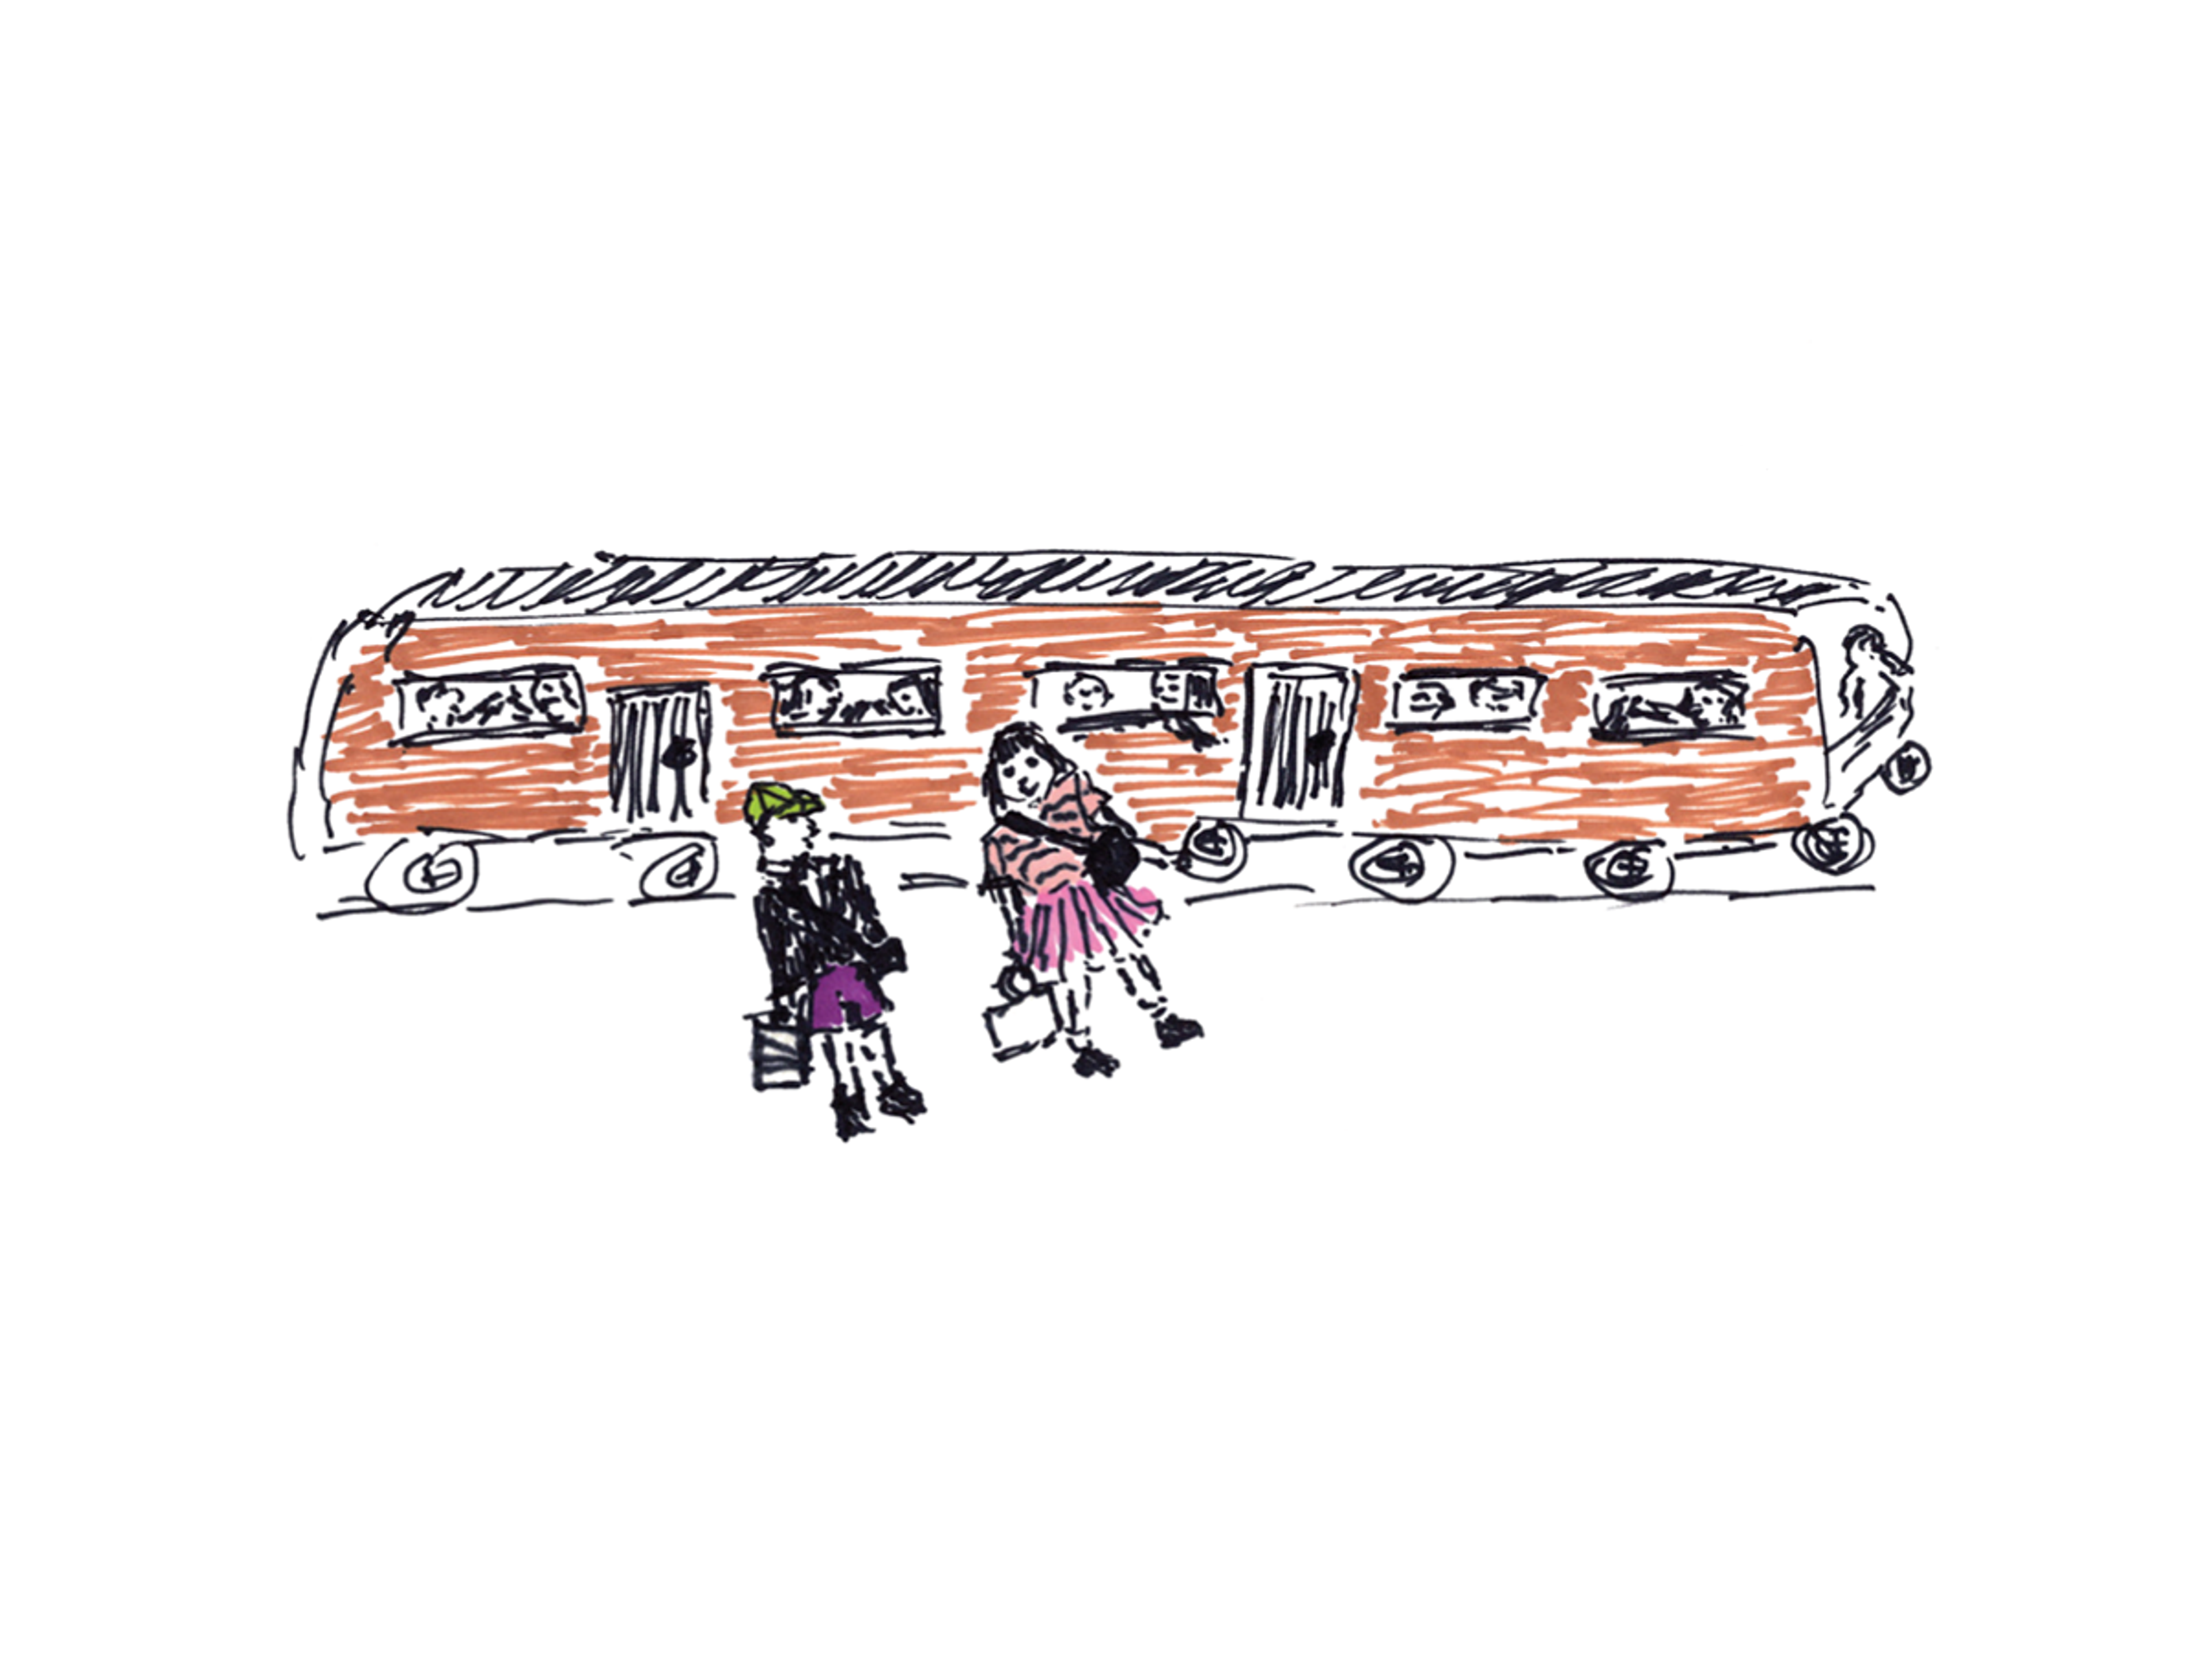 Illustration of two people on a railway platform with a train full of people behind